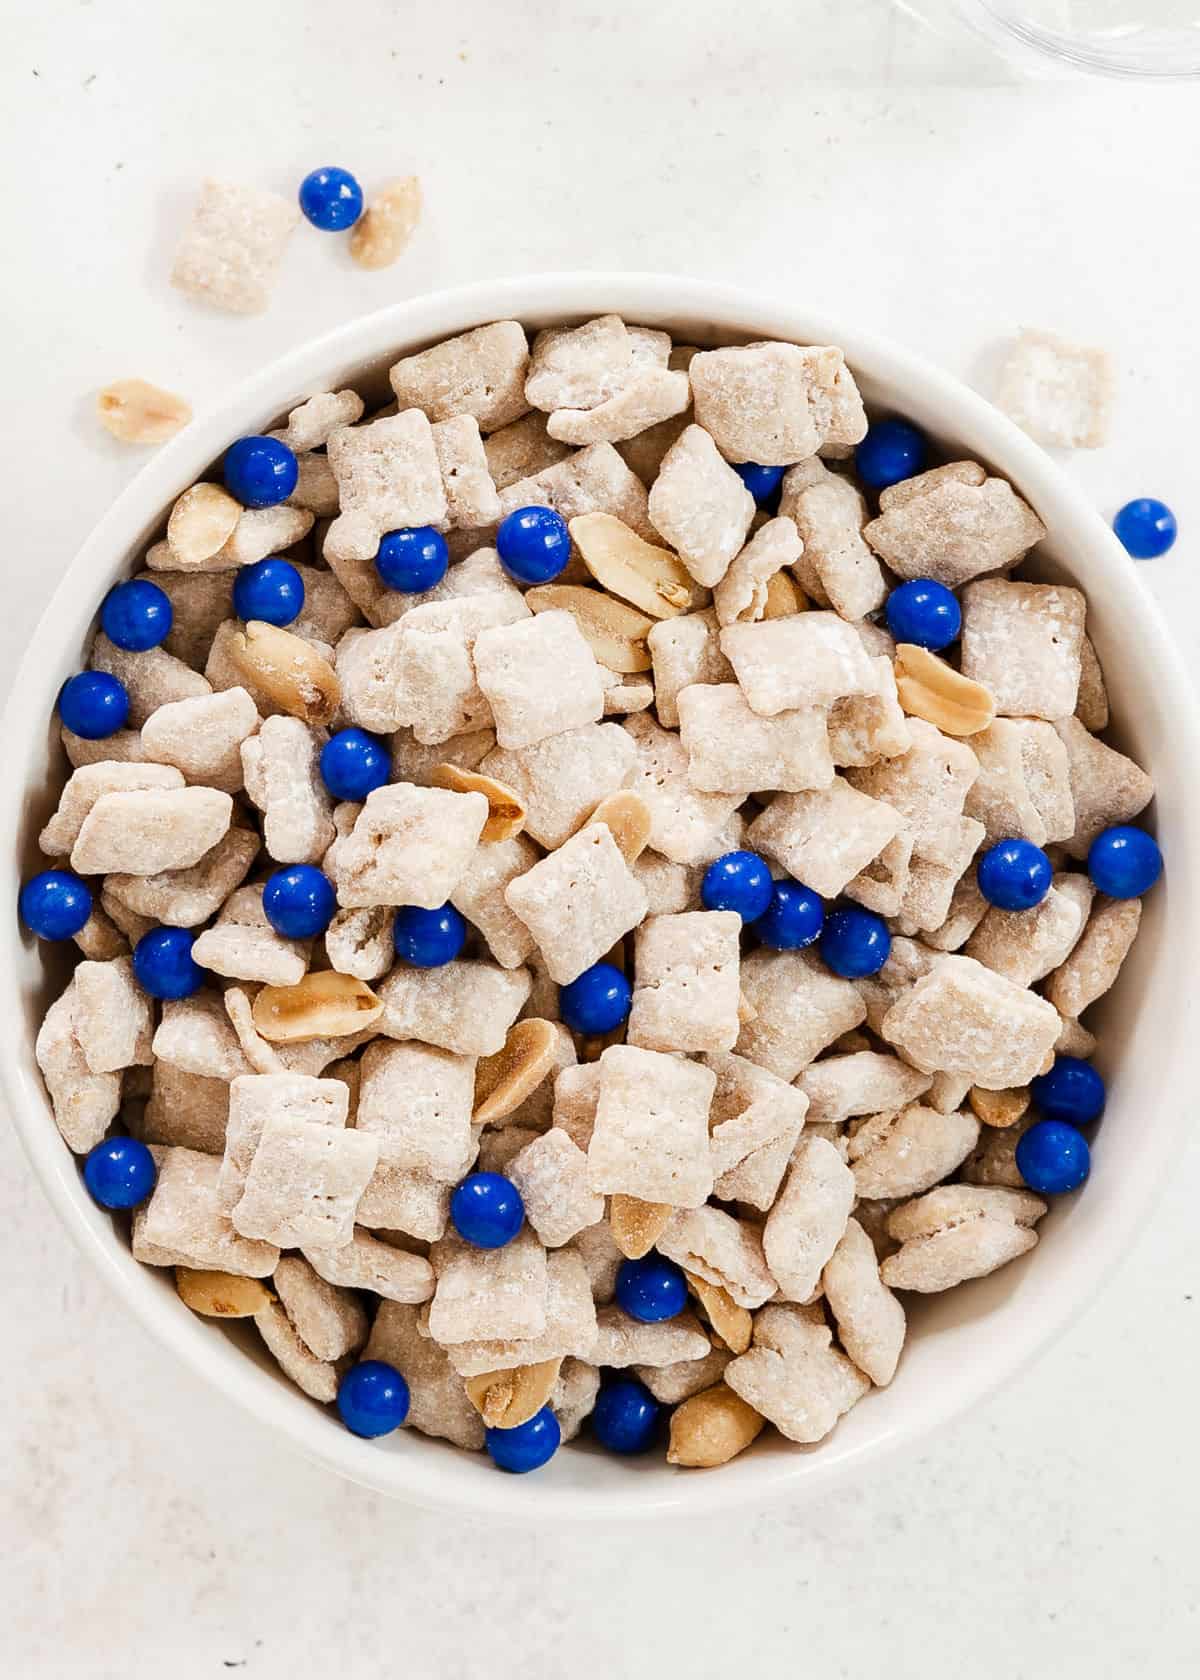 Chex muddy buddies with peanuts and blue candies in round bowl, overhead.